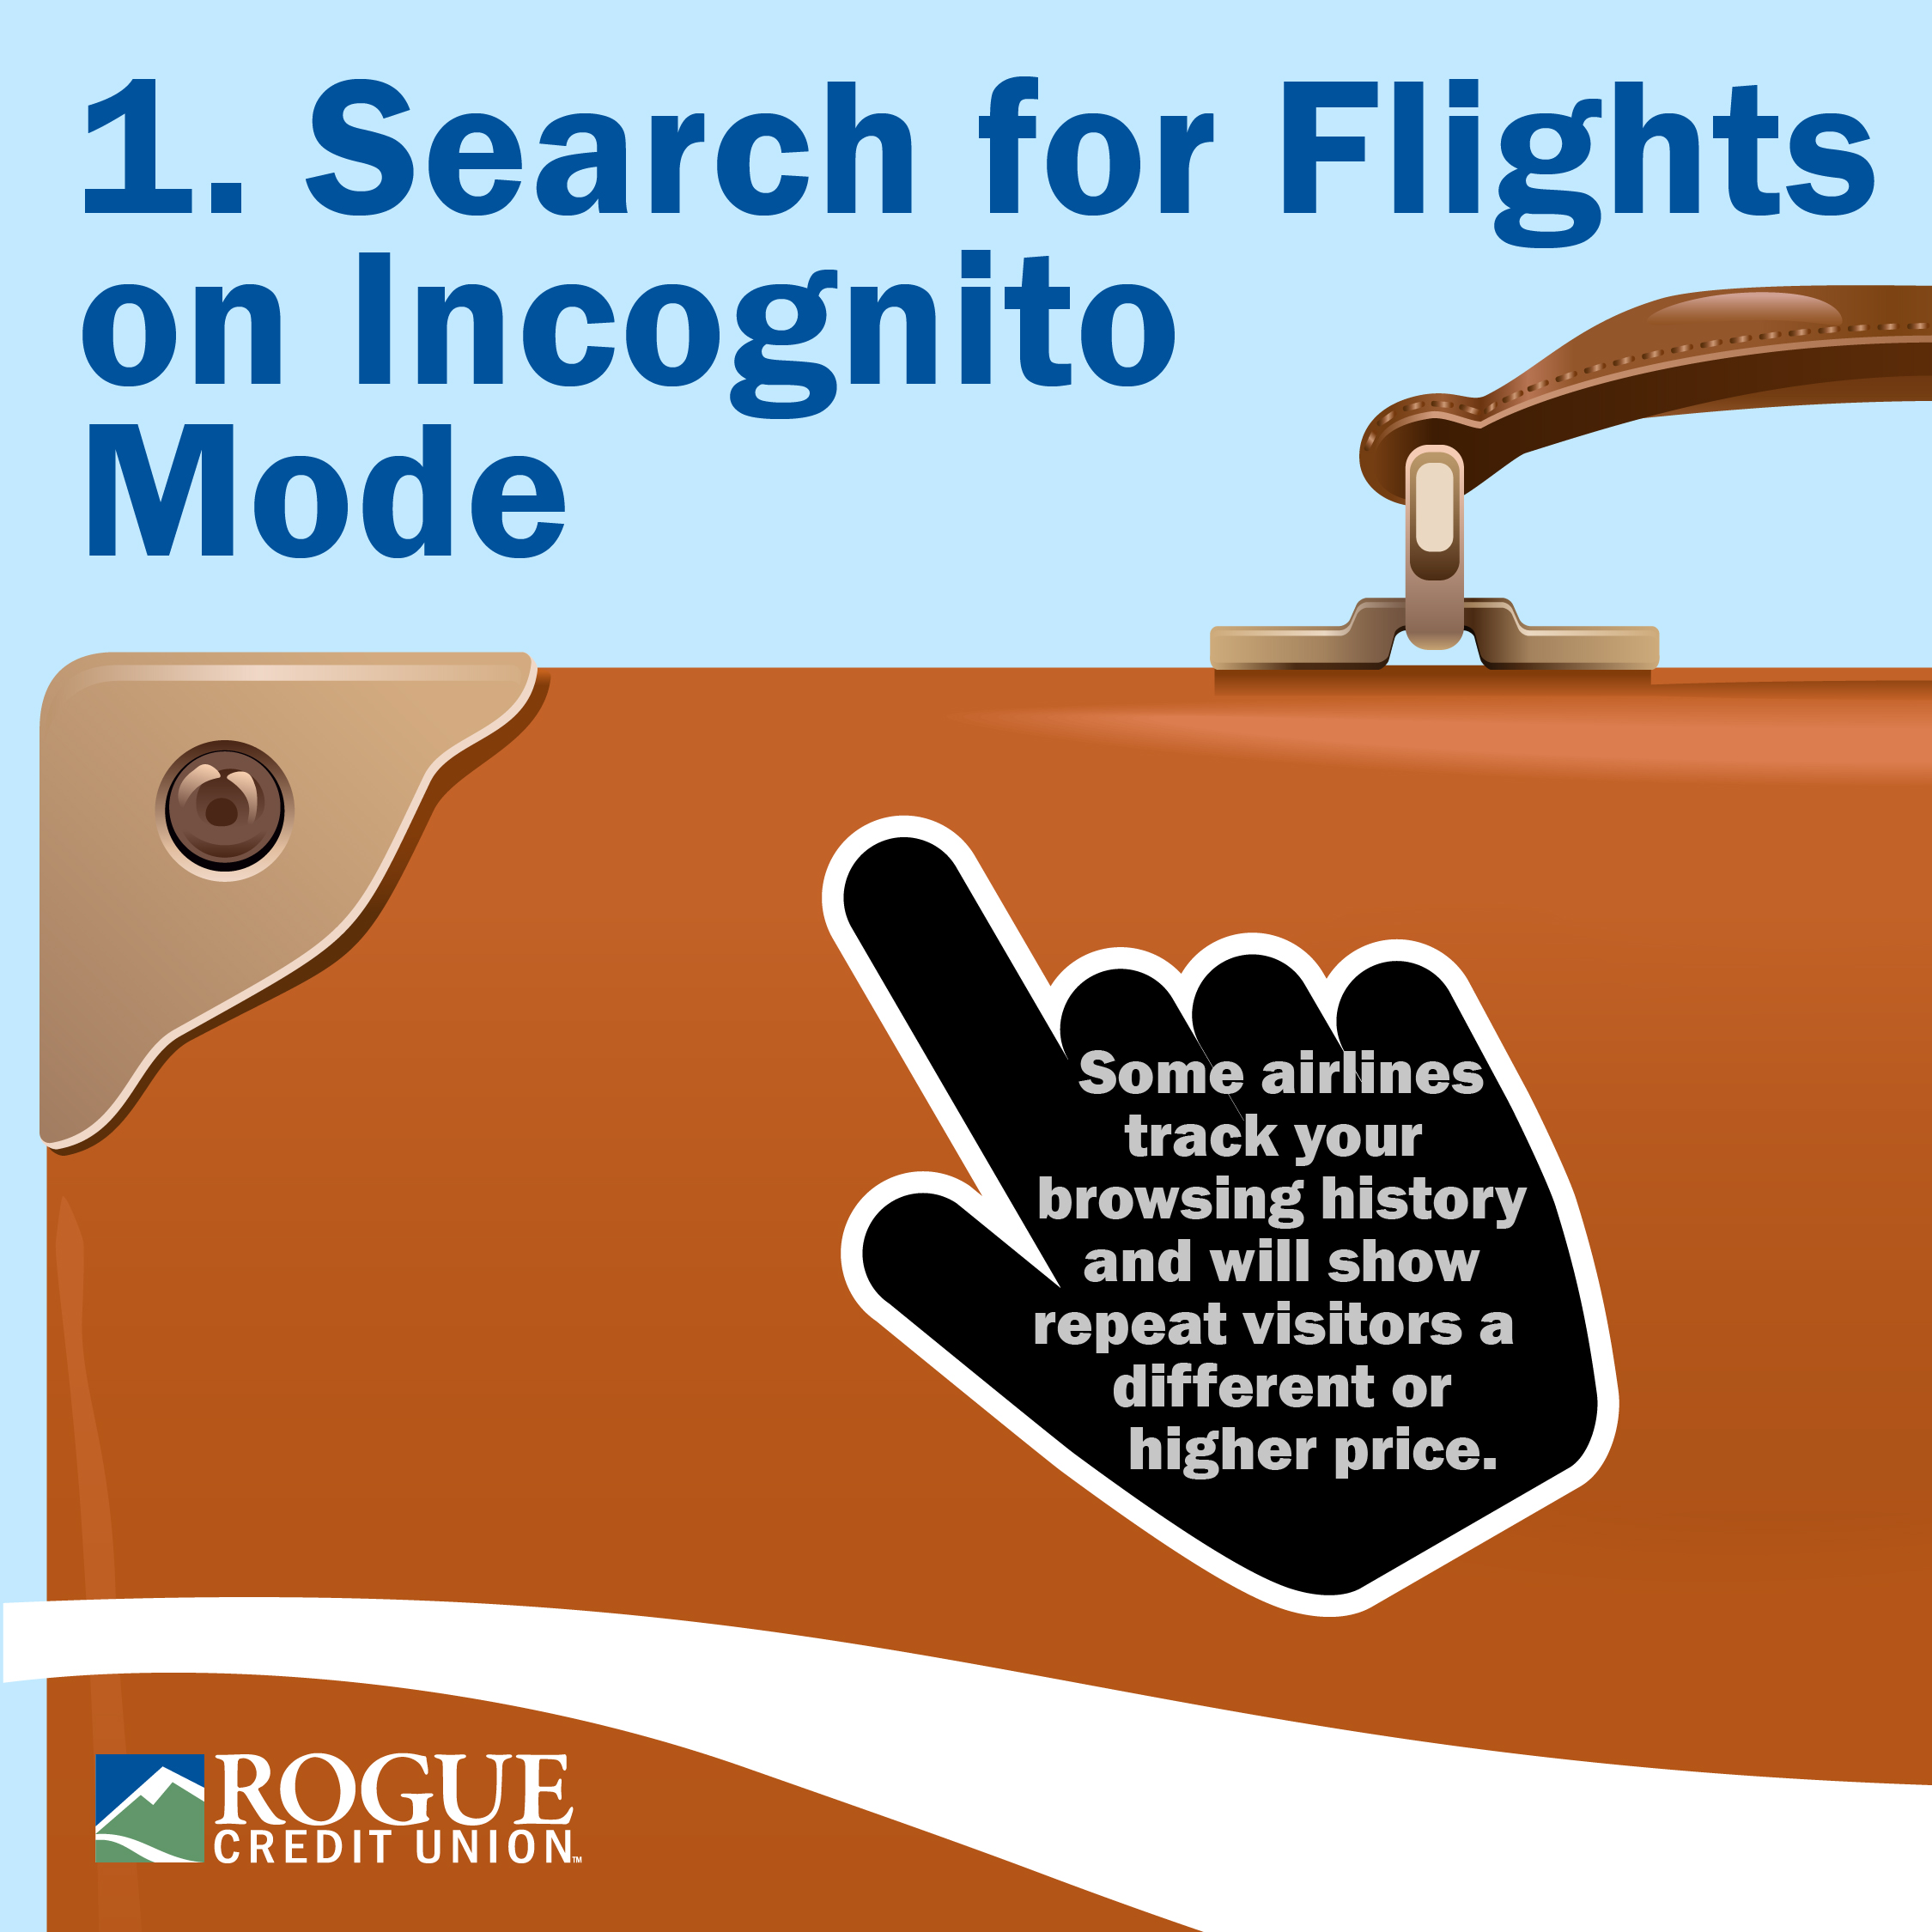 Search for flights on incognito mode